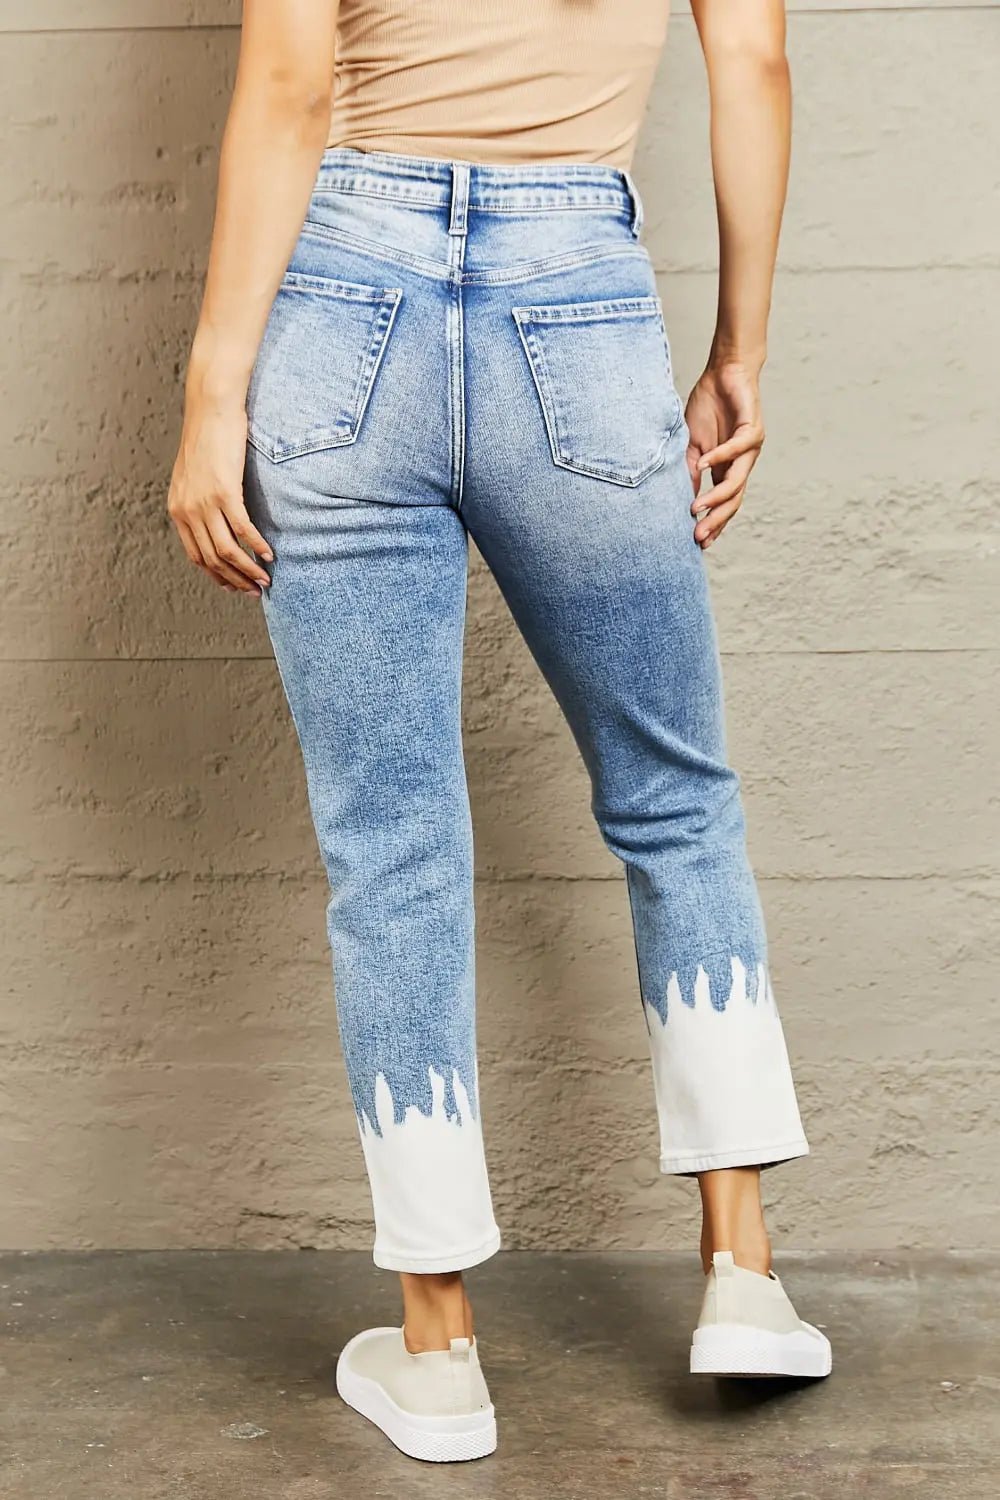 HIGH WAIST CROPPED PAINTED DENIM JEANS FOR WOMEN - MeadeuxHIGH WAIST CROPPED PAINTED DENIM JEANS FOR WOMENJeansMeadeux